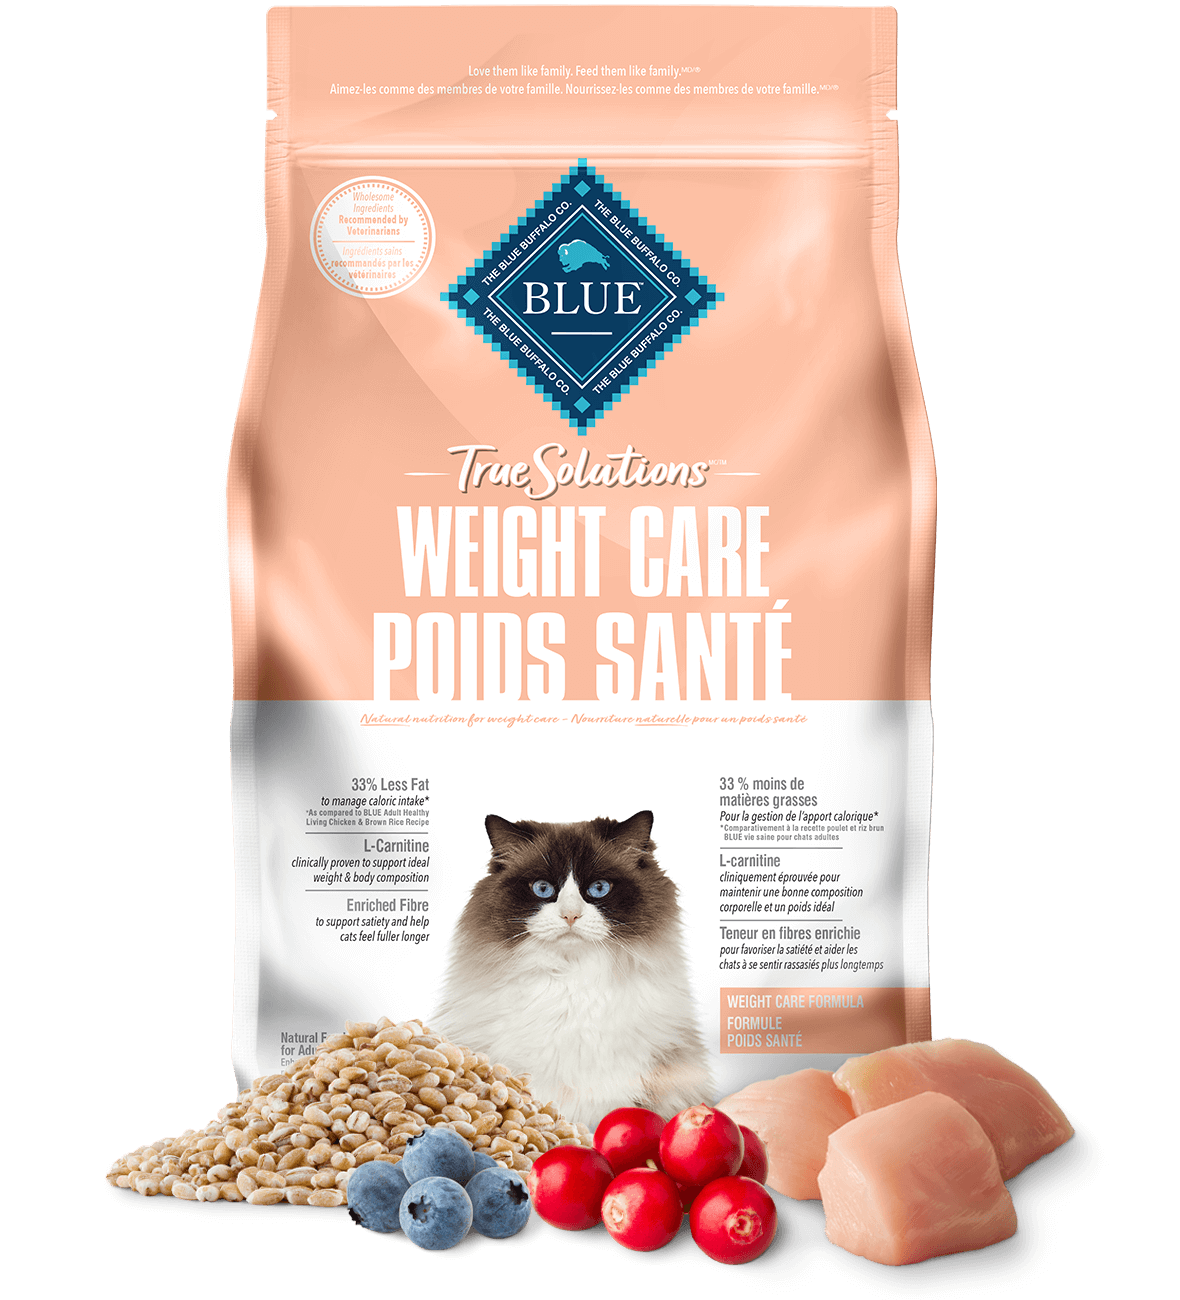 blue true solutions weight care formula cat dry food